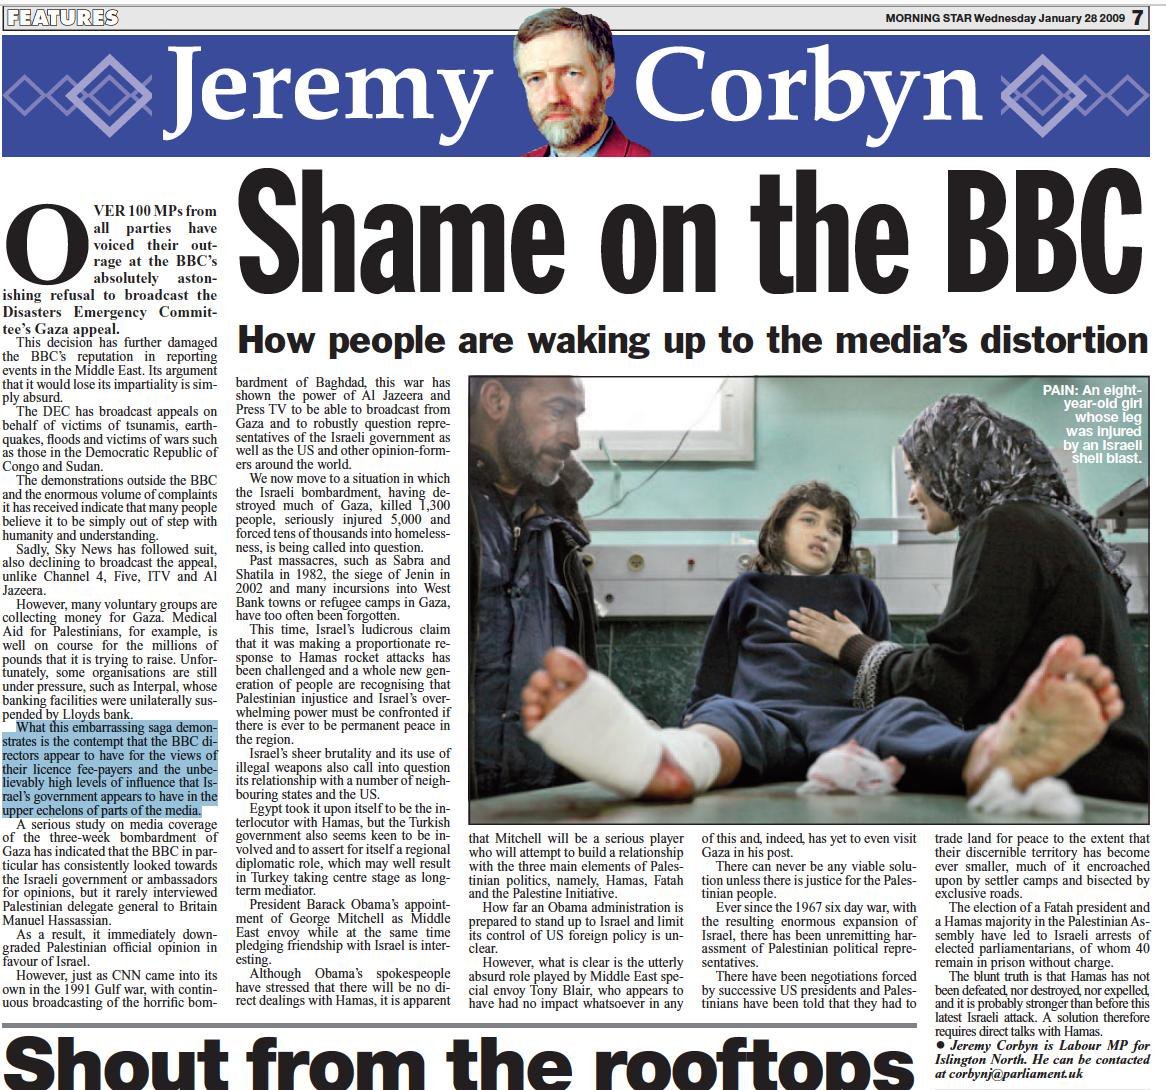 On January 28th 2009, Corbyn wrote an article describing "unbelievably high levels of influence that Israel's Government appears to have in the upper echelons of parts of the media". A reference, of course, to the theory that an international Jewish elite controls the news.